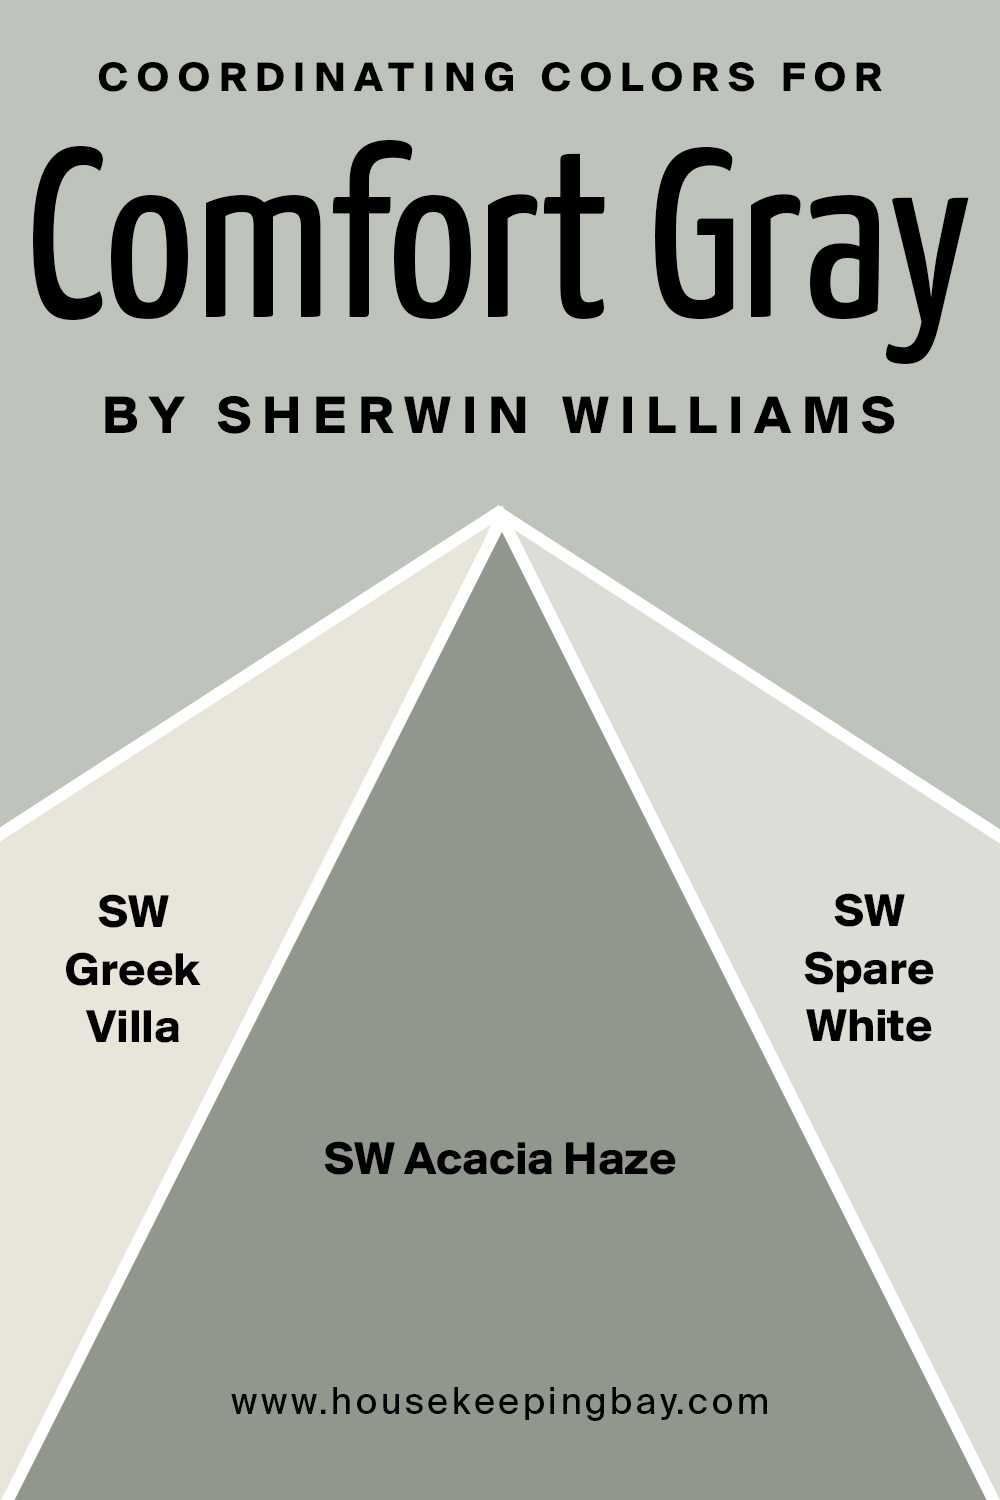 Coordinating Colors for Comfort Gray by Sherwin Williams